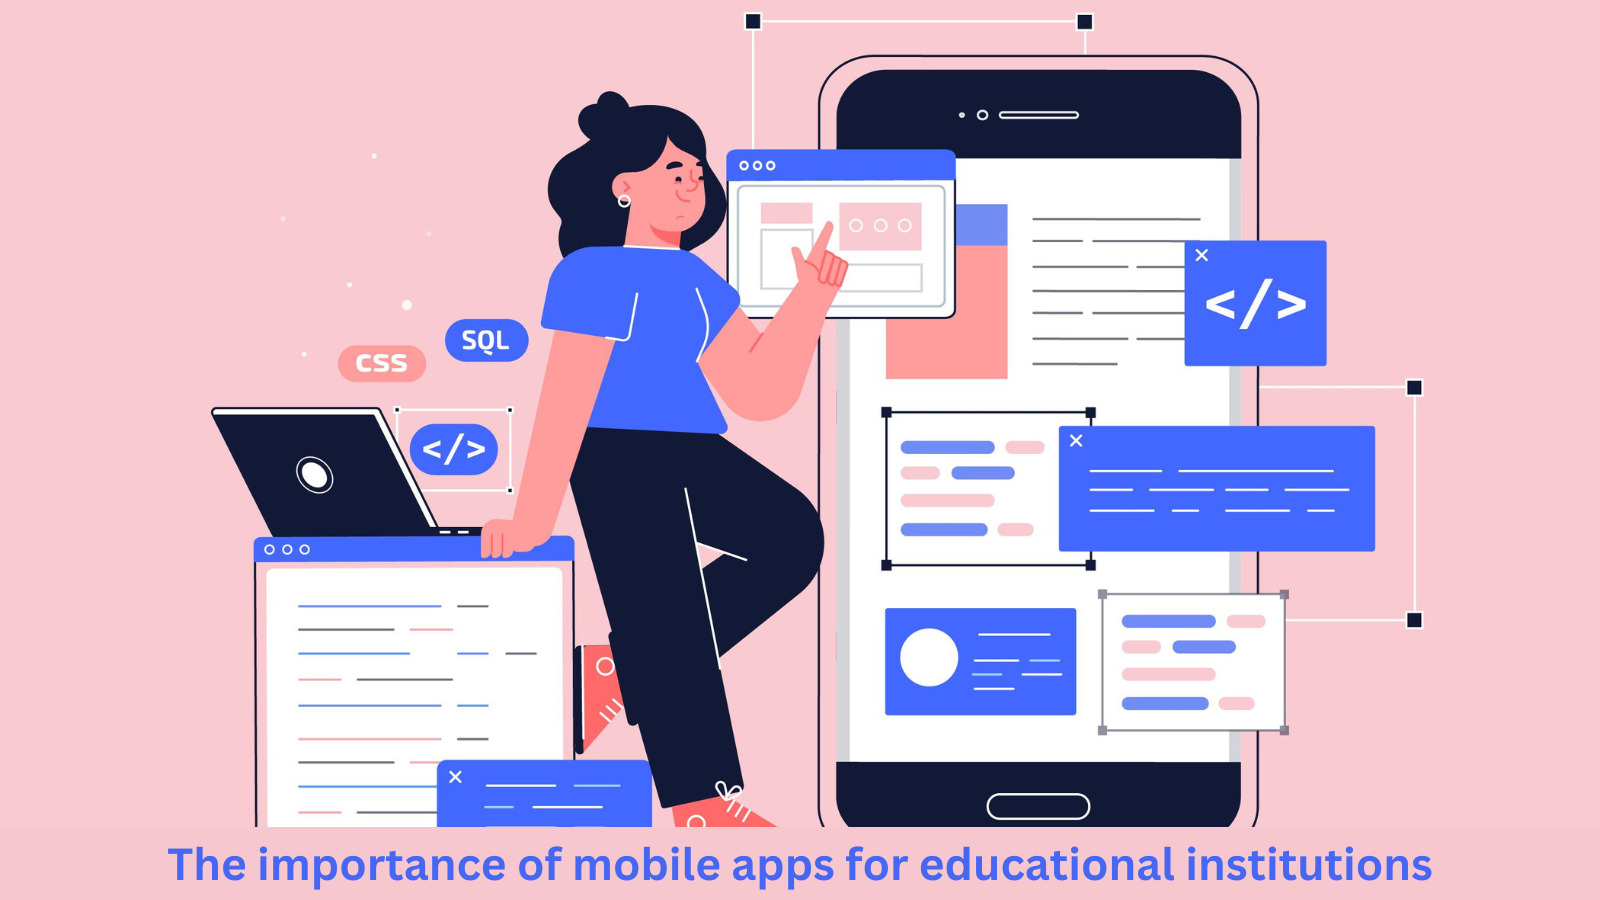 The importance of mobile apps for educational institutions